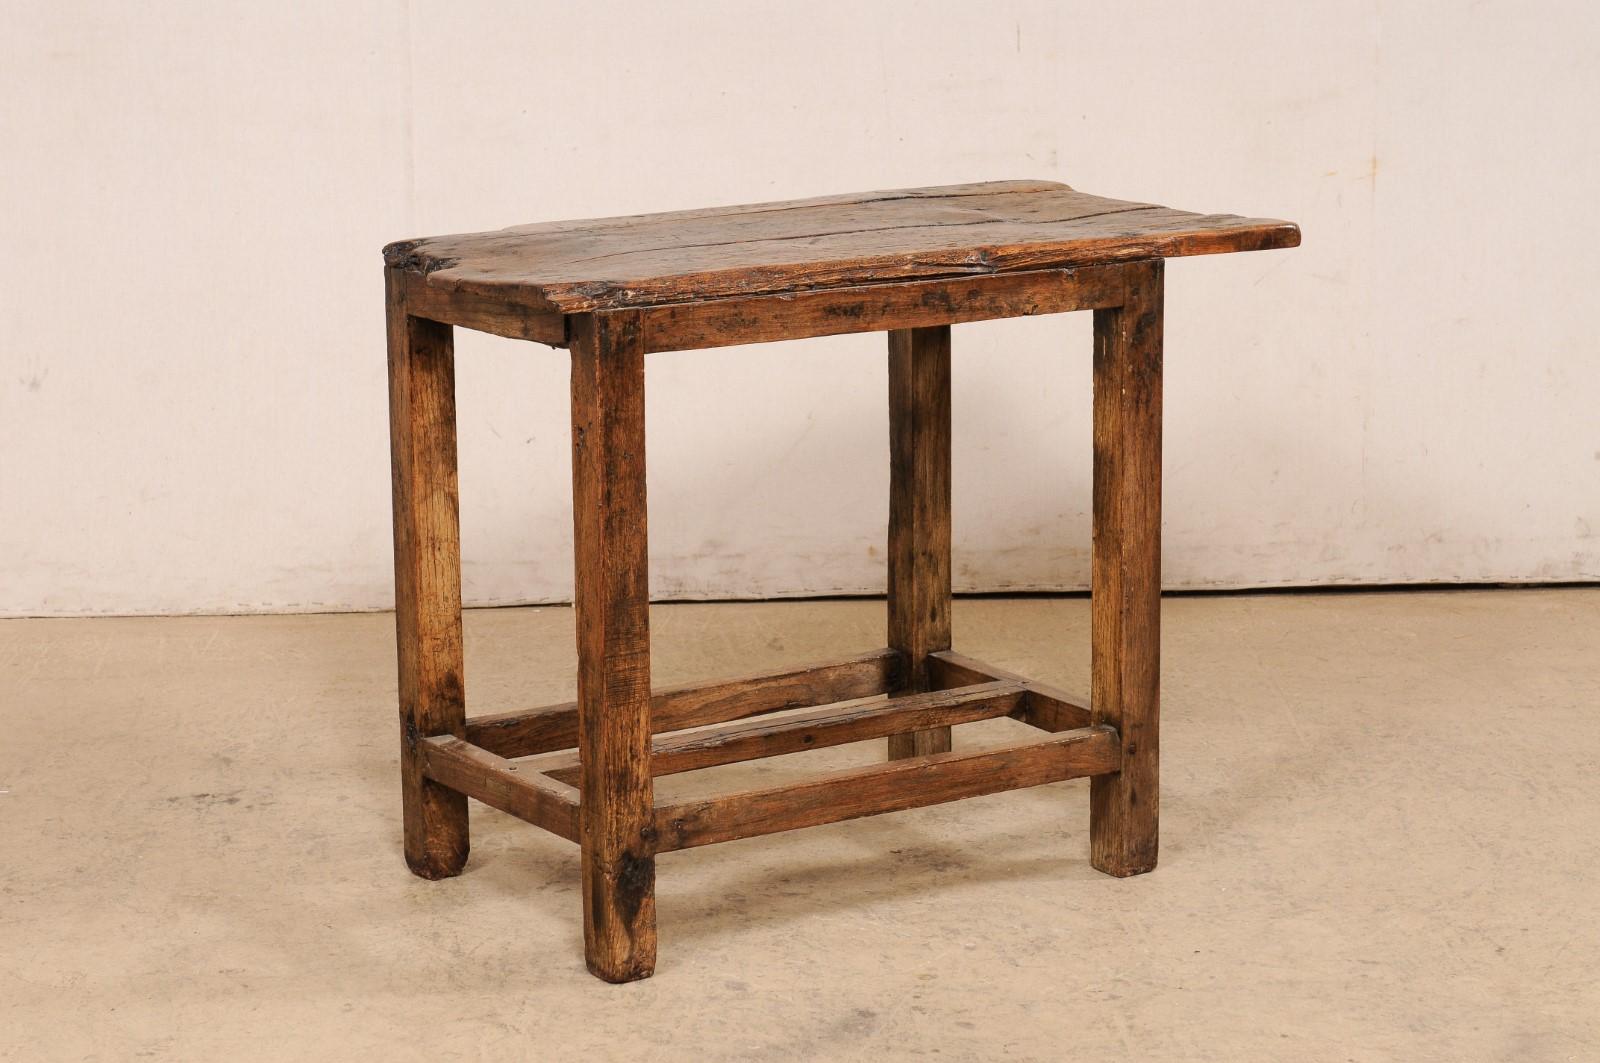 A Spanish rustic wooden accent table, with off-set top, from the turn of the 18th and 19th century. This antique table from France, with it's simplistic pastoral design, features a rectangular-shaped top, with live-edging in some areas and has been